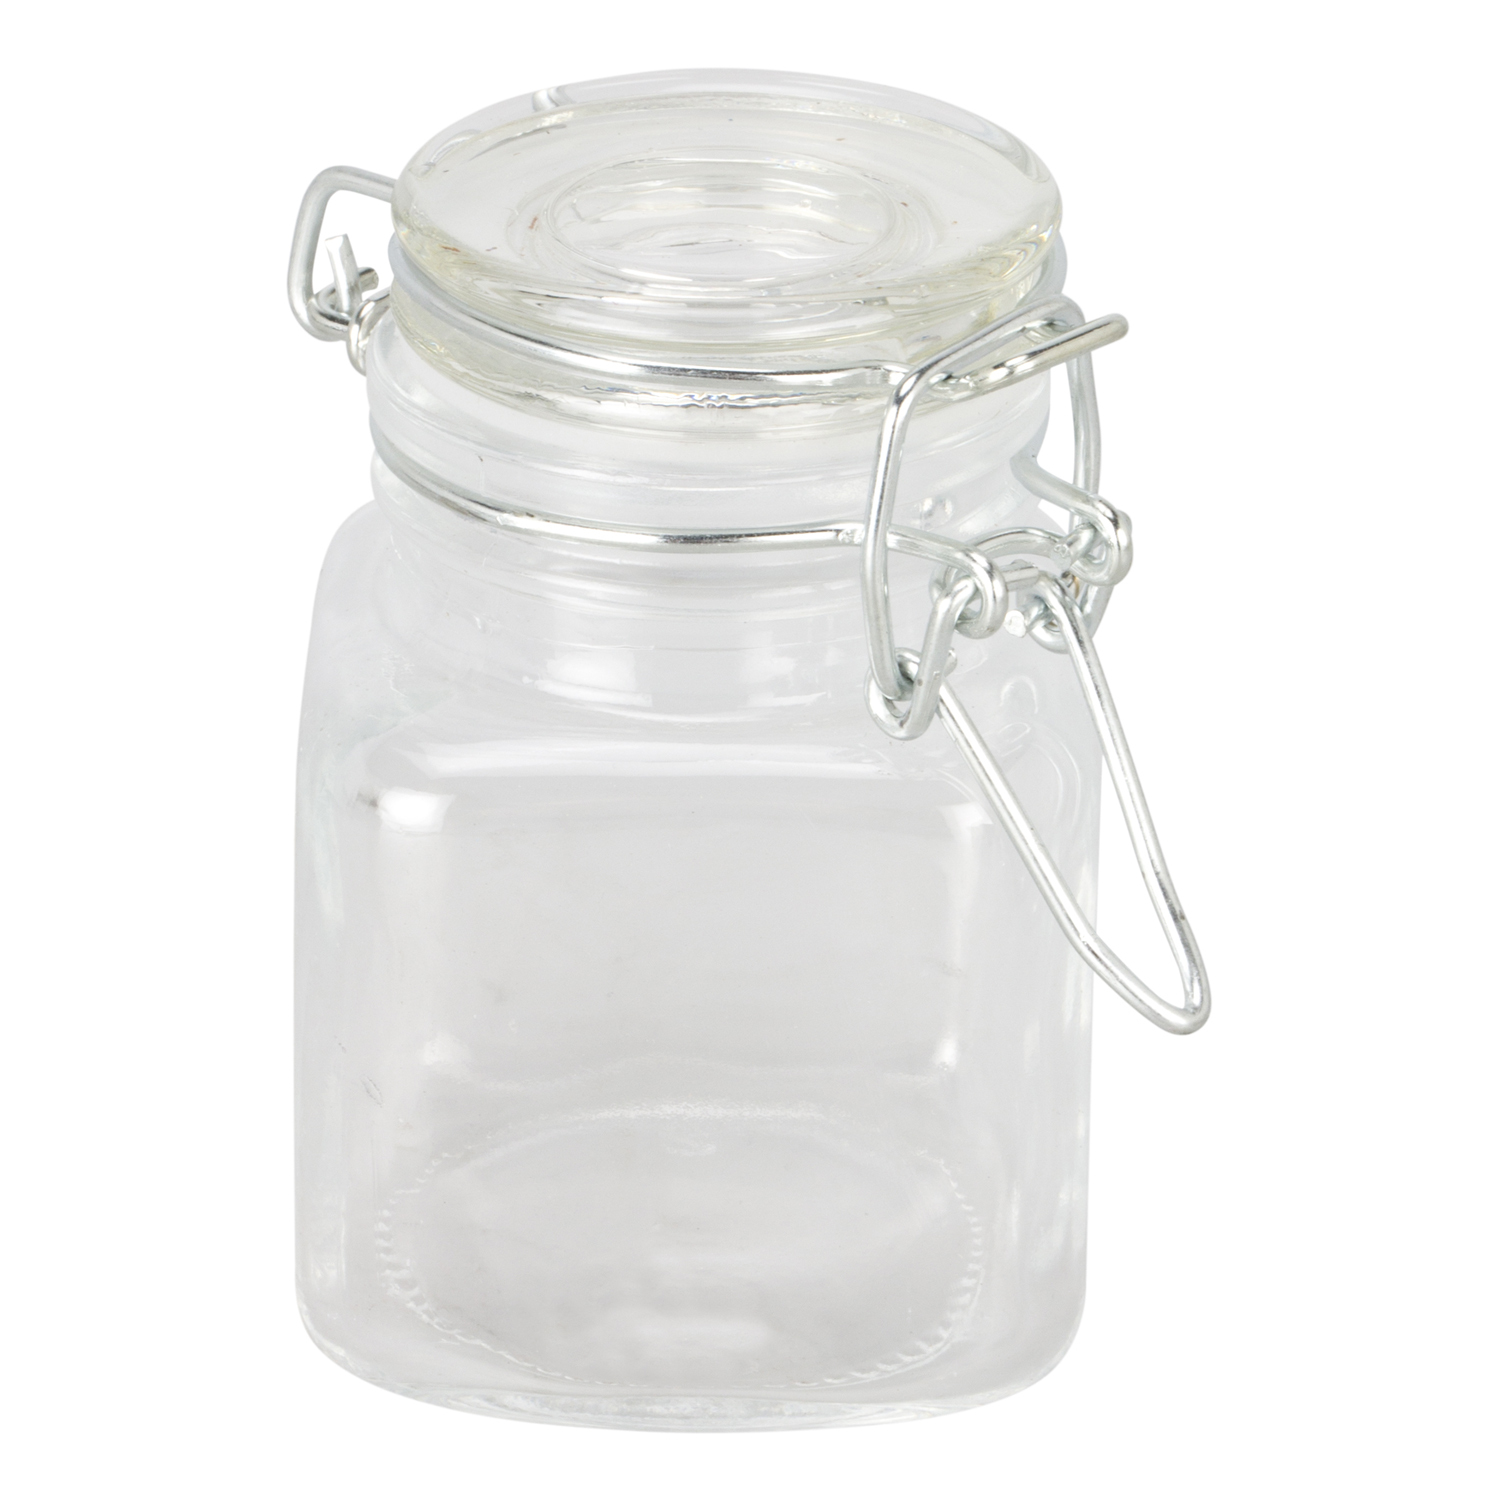 Glass Spice Storage Jar with Clip on Lid Image